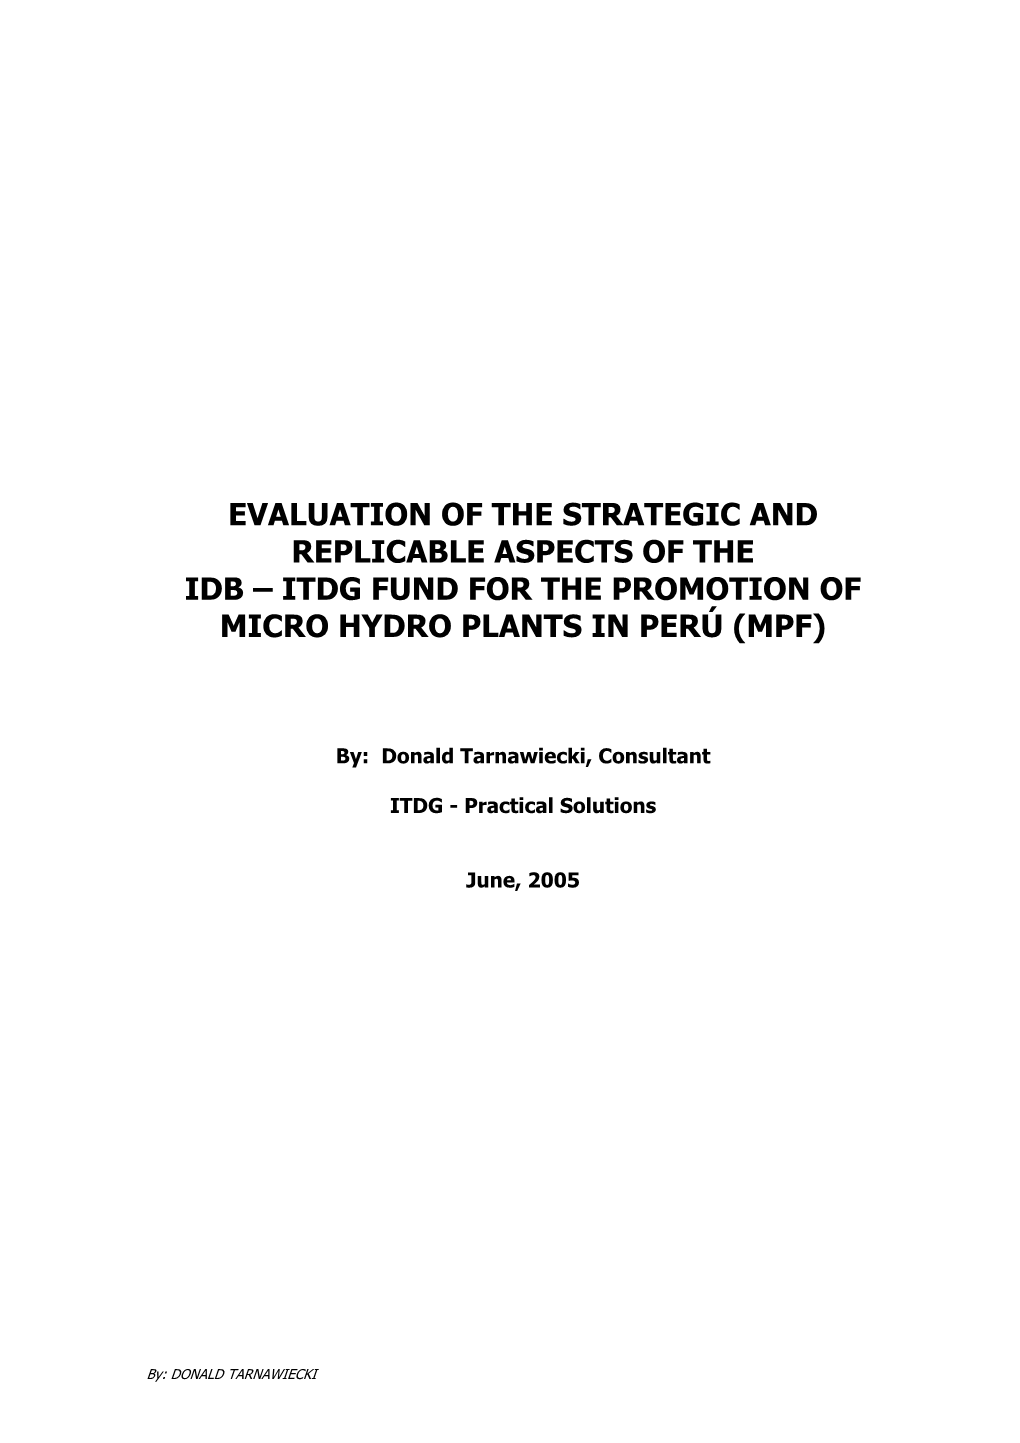 Evaluation of the Strategic and Replicable Aspects of the Idb – Itdg Fund for the Promotion of Micro Hydro Plants in Perú (Mpf)